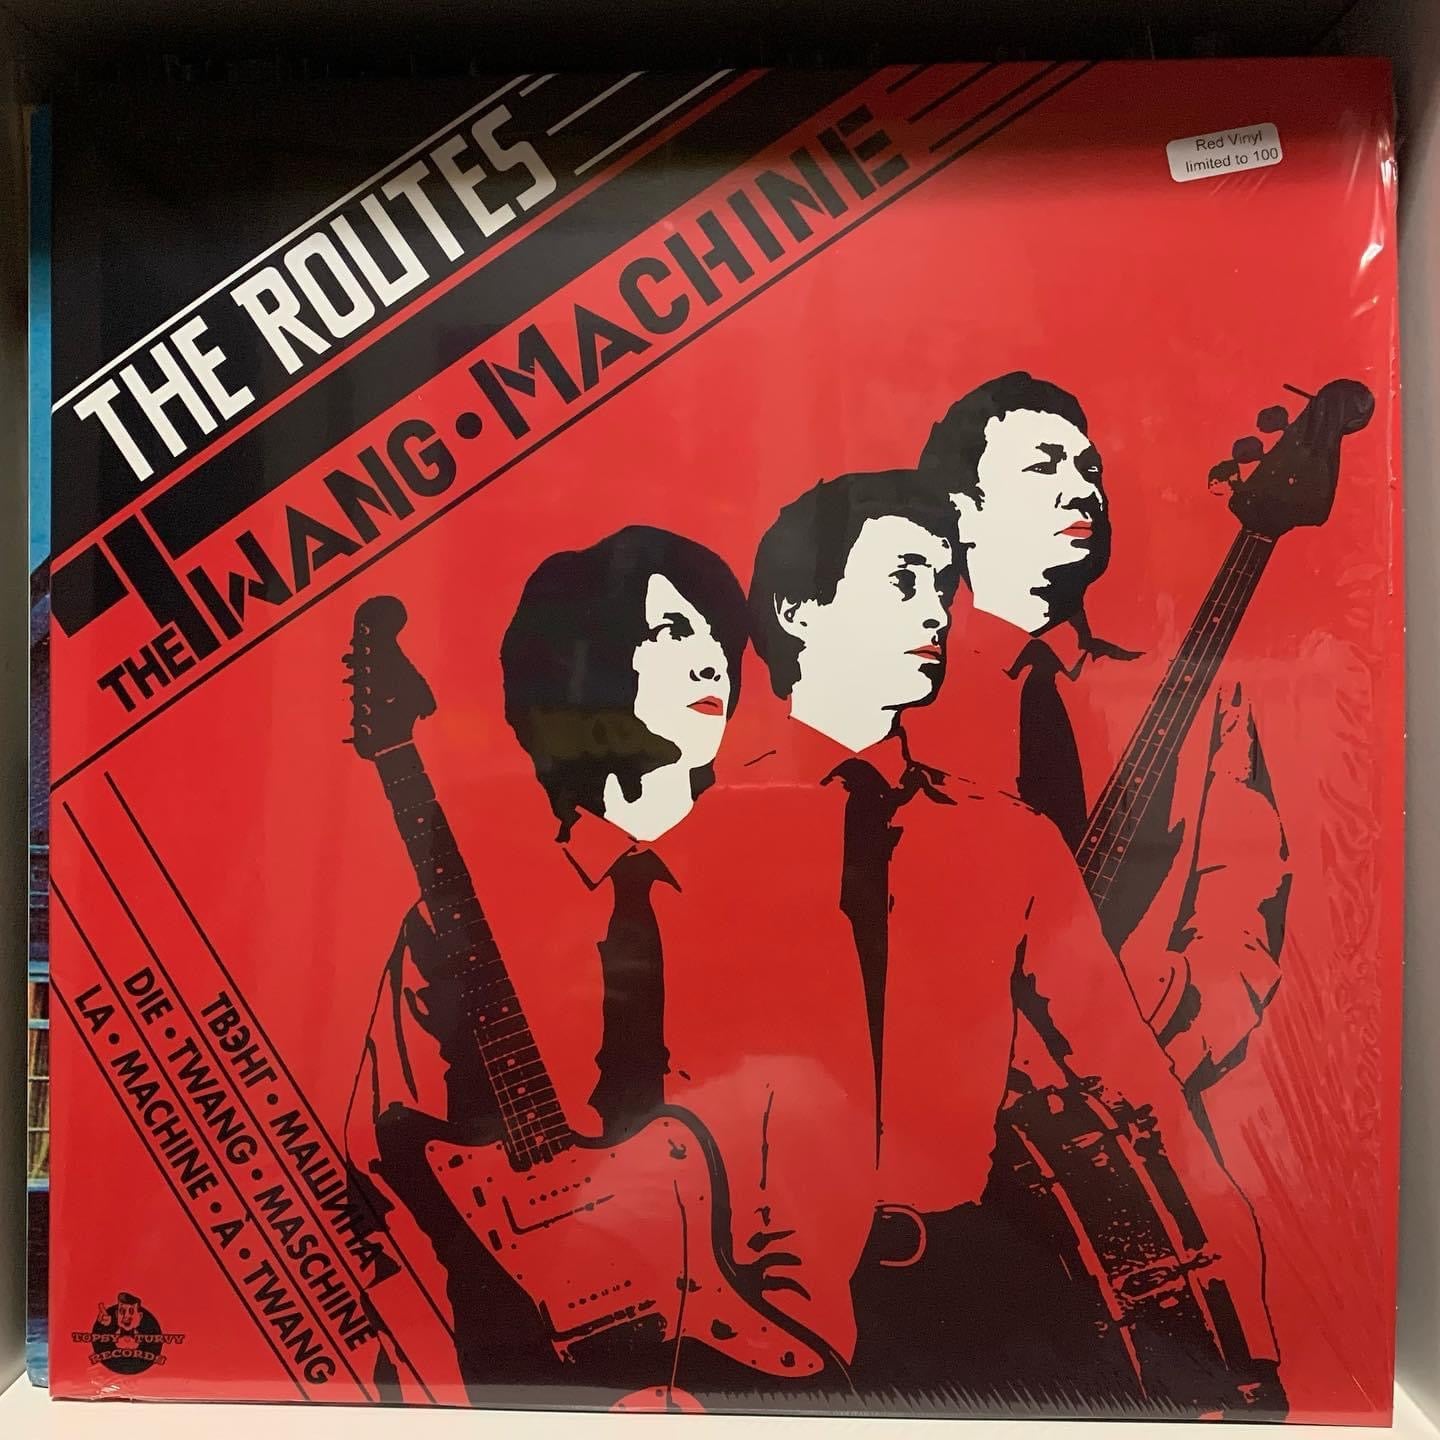 OMRDST-035 The Routes “The Twang Machine” VINYL LP (Import) FIRST PRESSING!